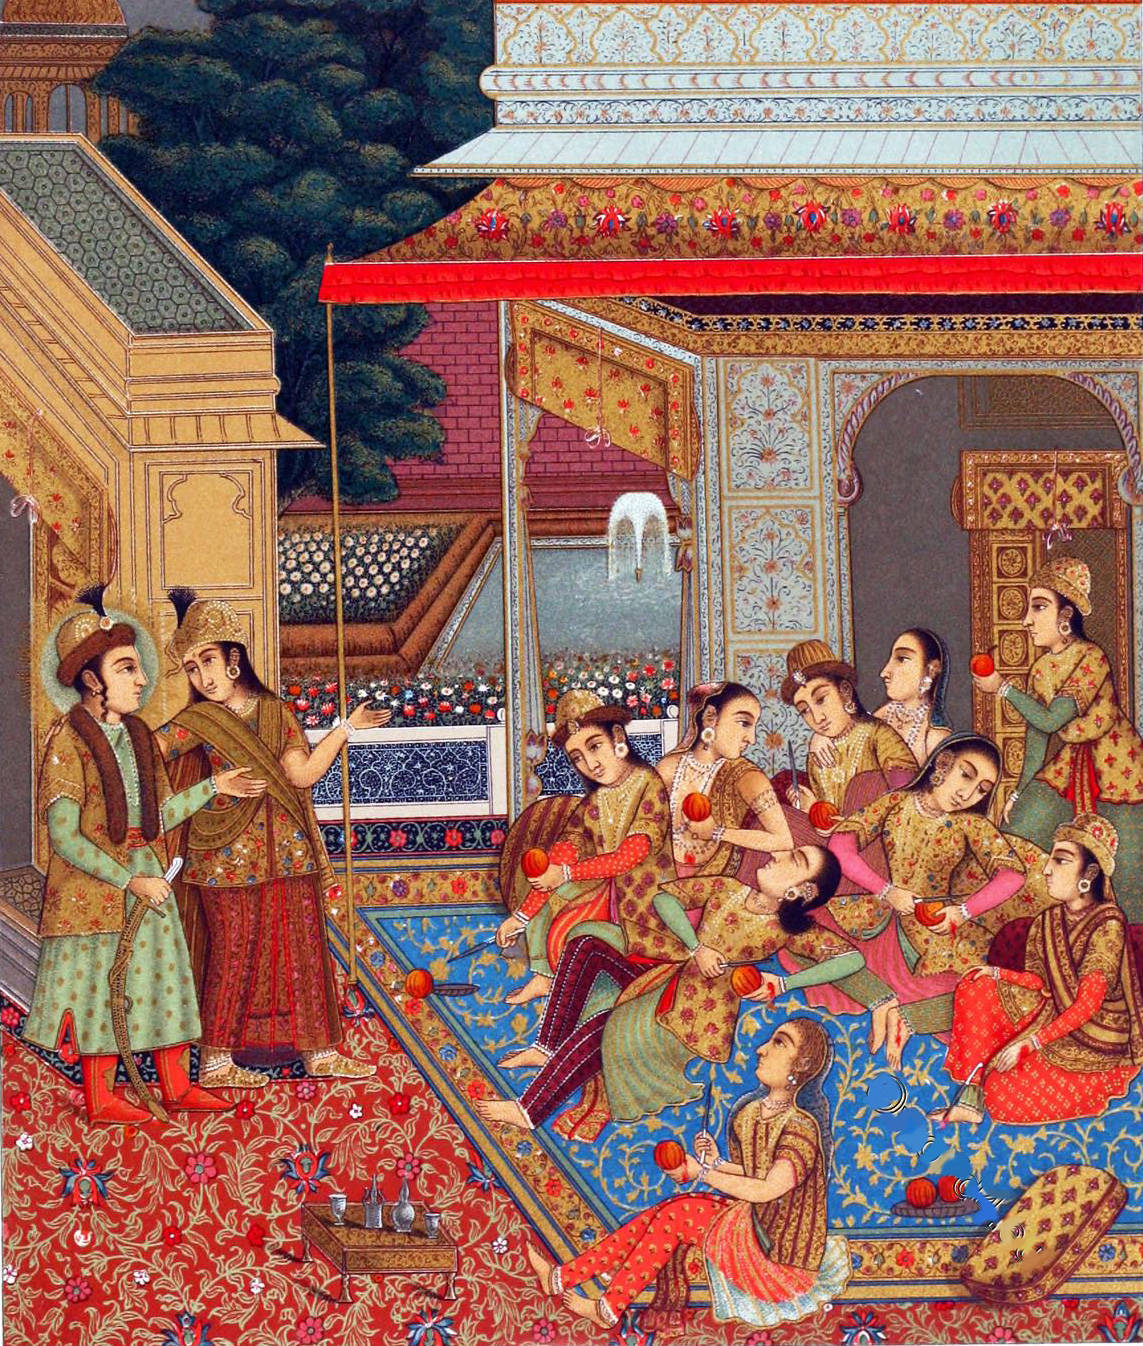 Inner courtyard of an Indian harem of the Mughal period